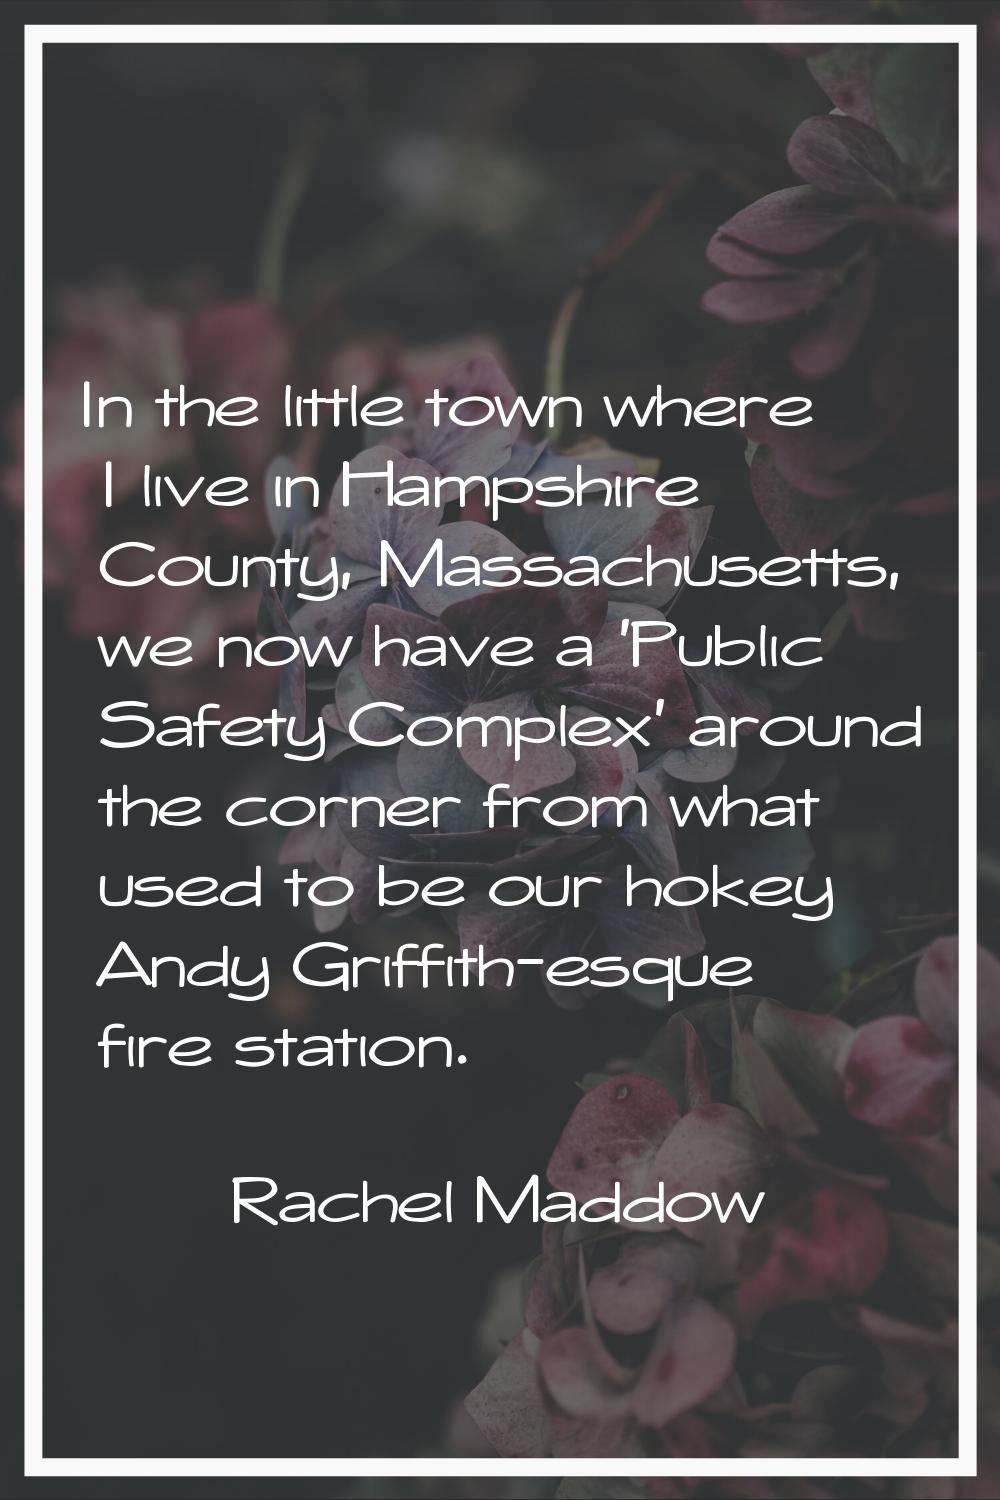 In the little town where I live in Hampshire County, Massachusetts, we now have a 'Public Safety Co